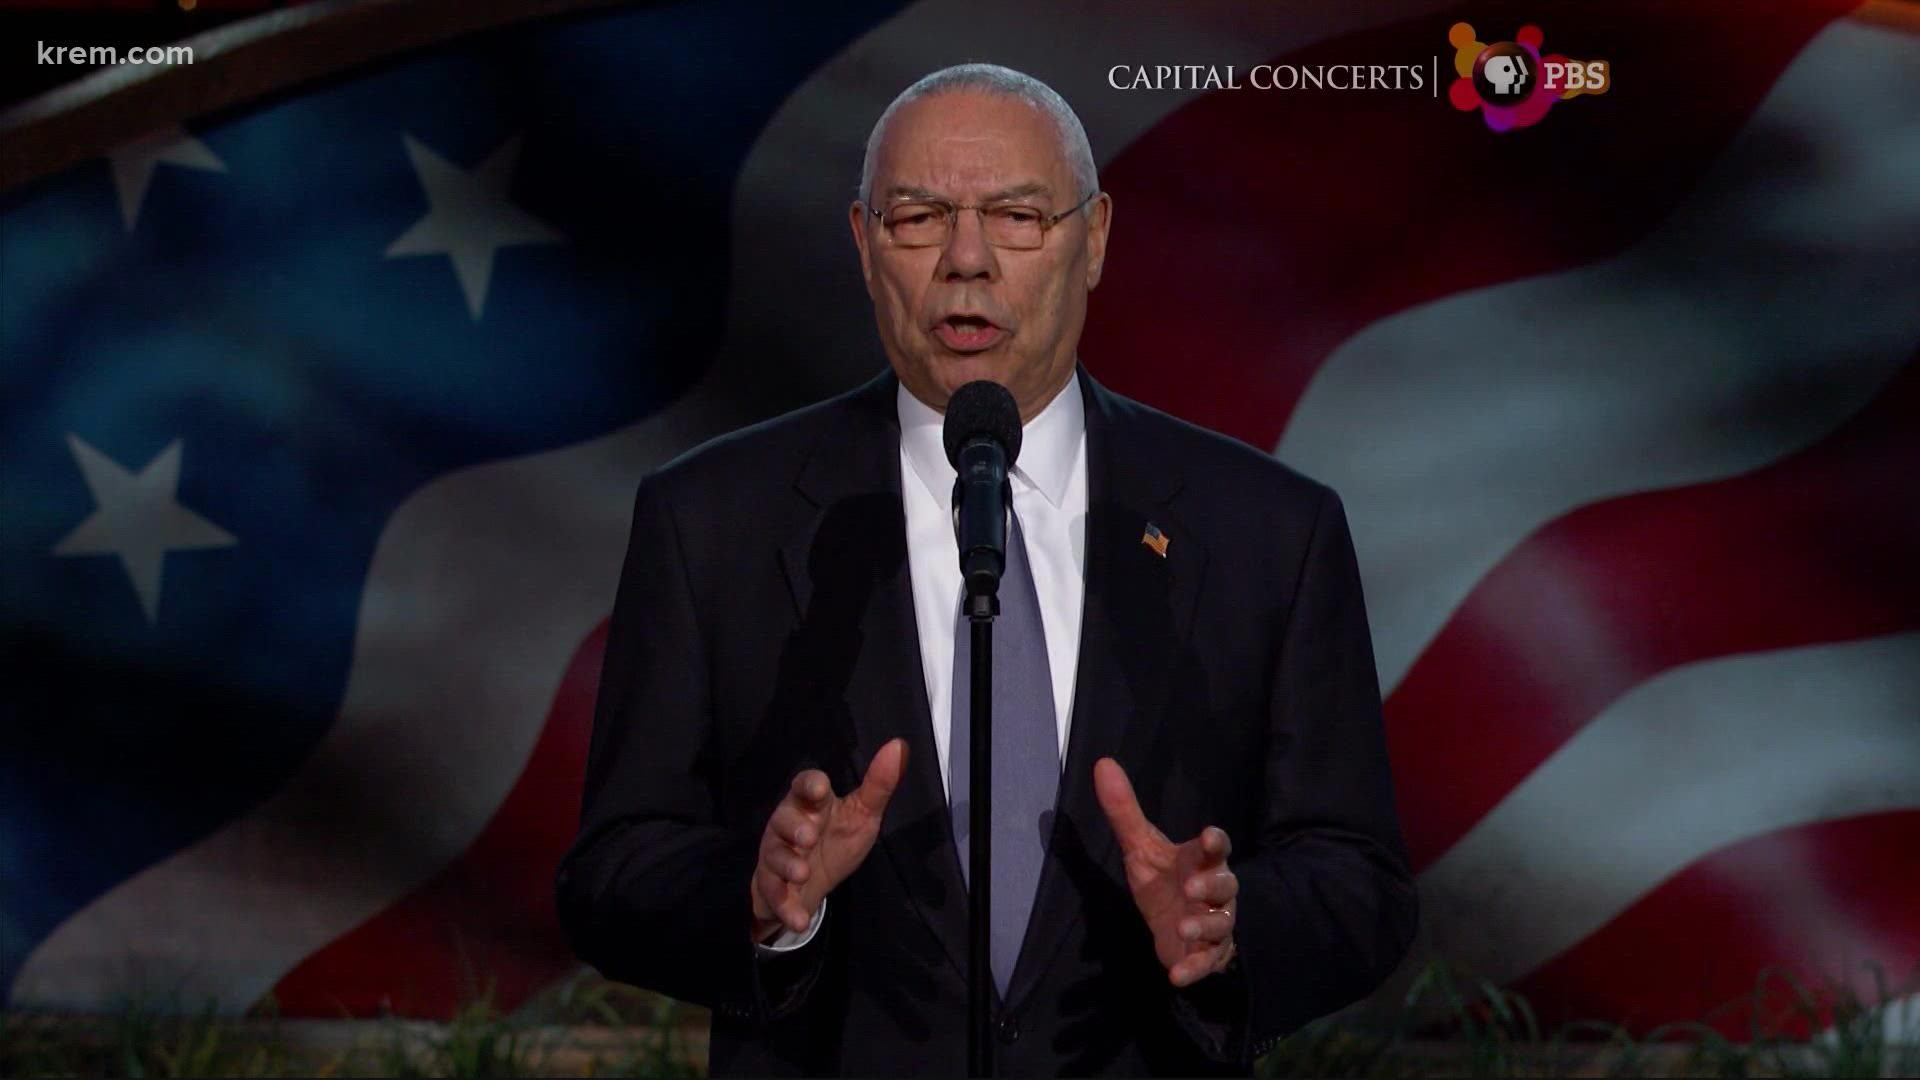 In an announcement on social media, Colin Powell’s family said he had been fully vaccinated.